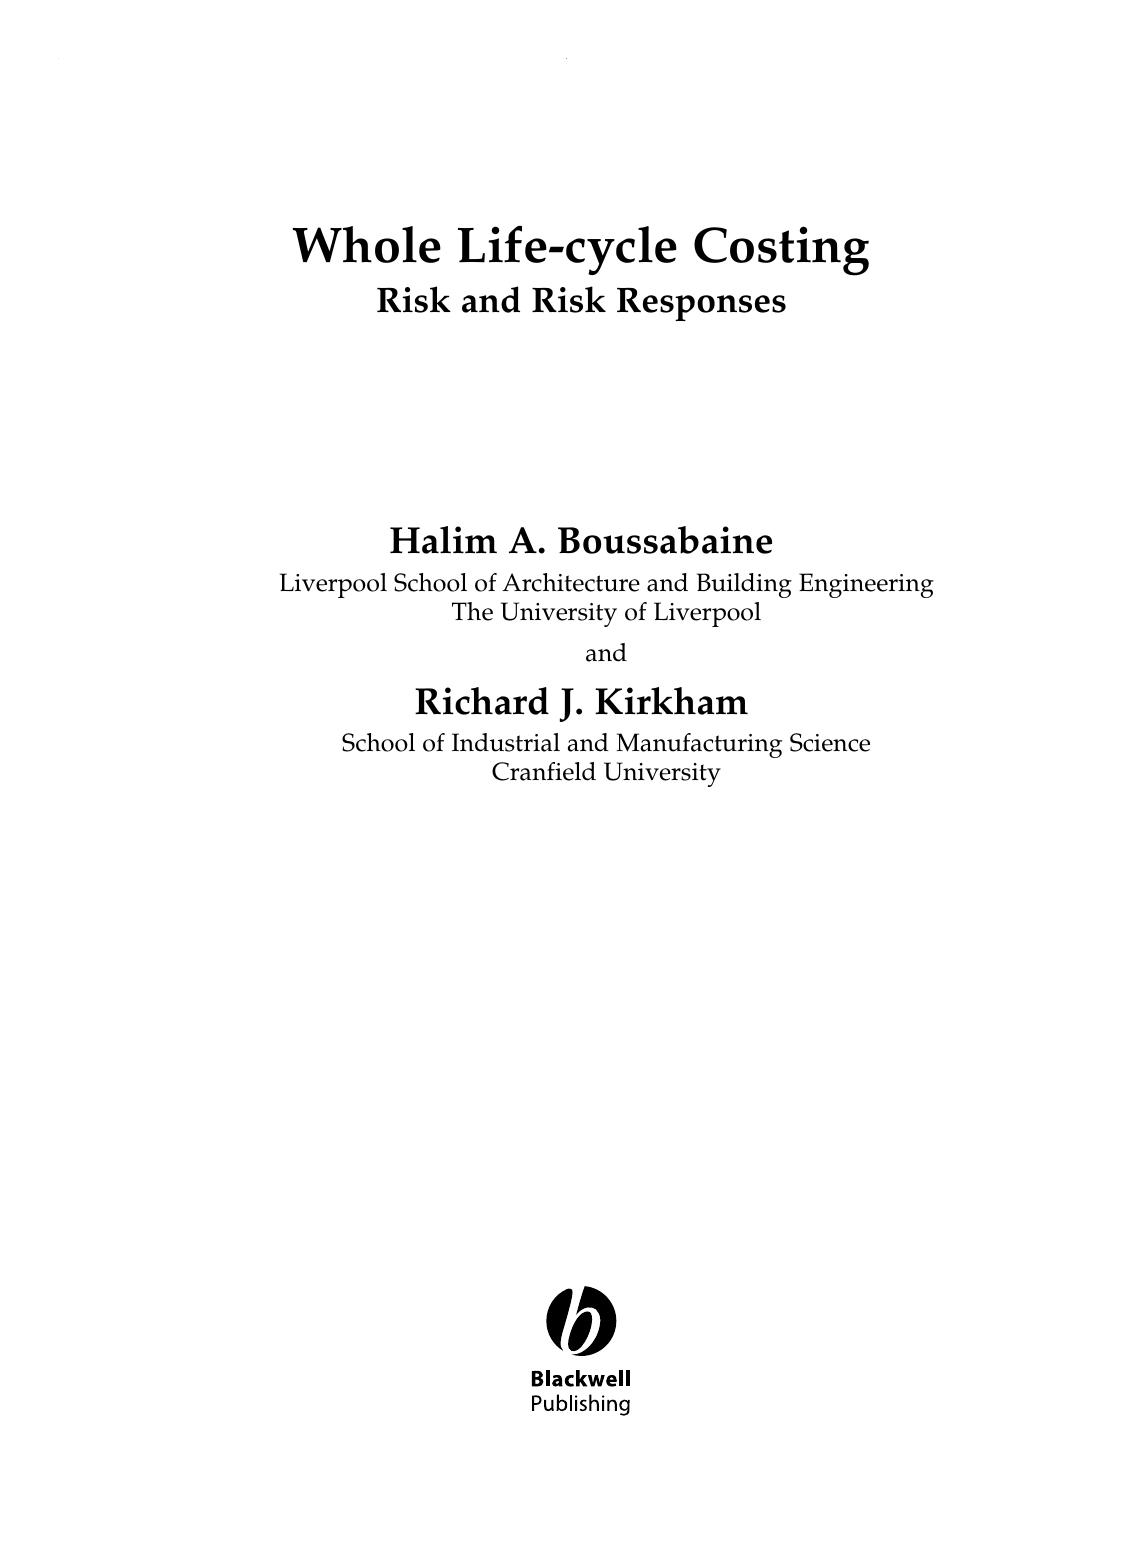 Whole Life-Cycle Costing Risk and Risk Responses  2003